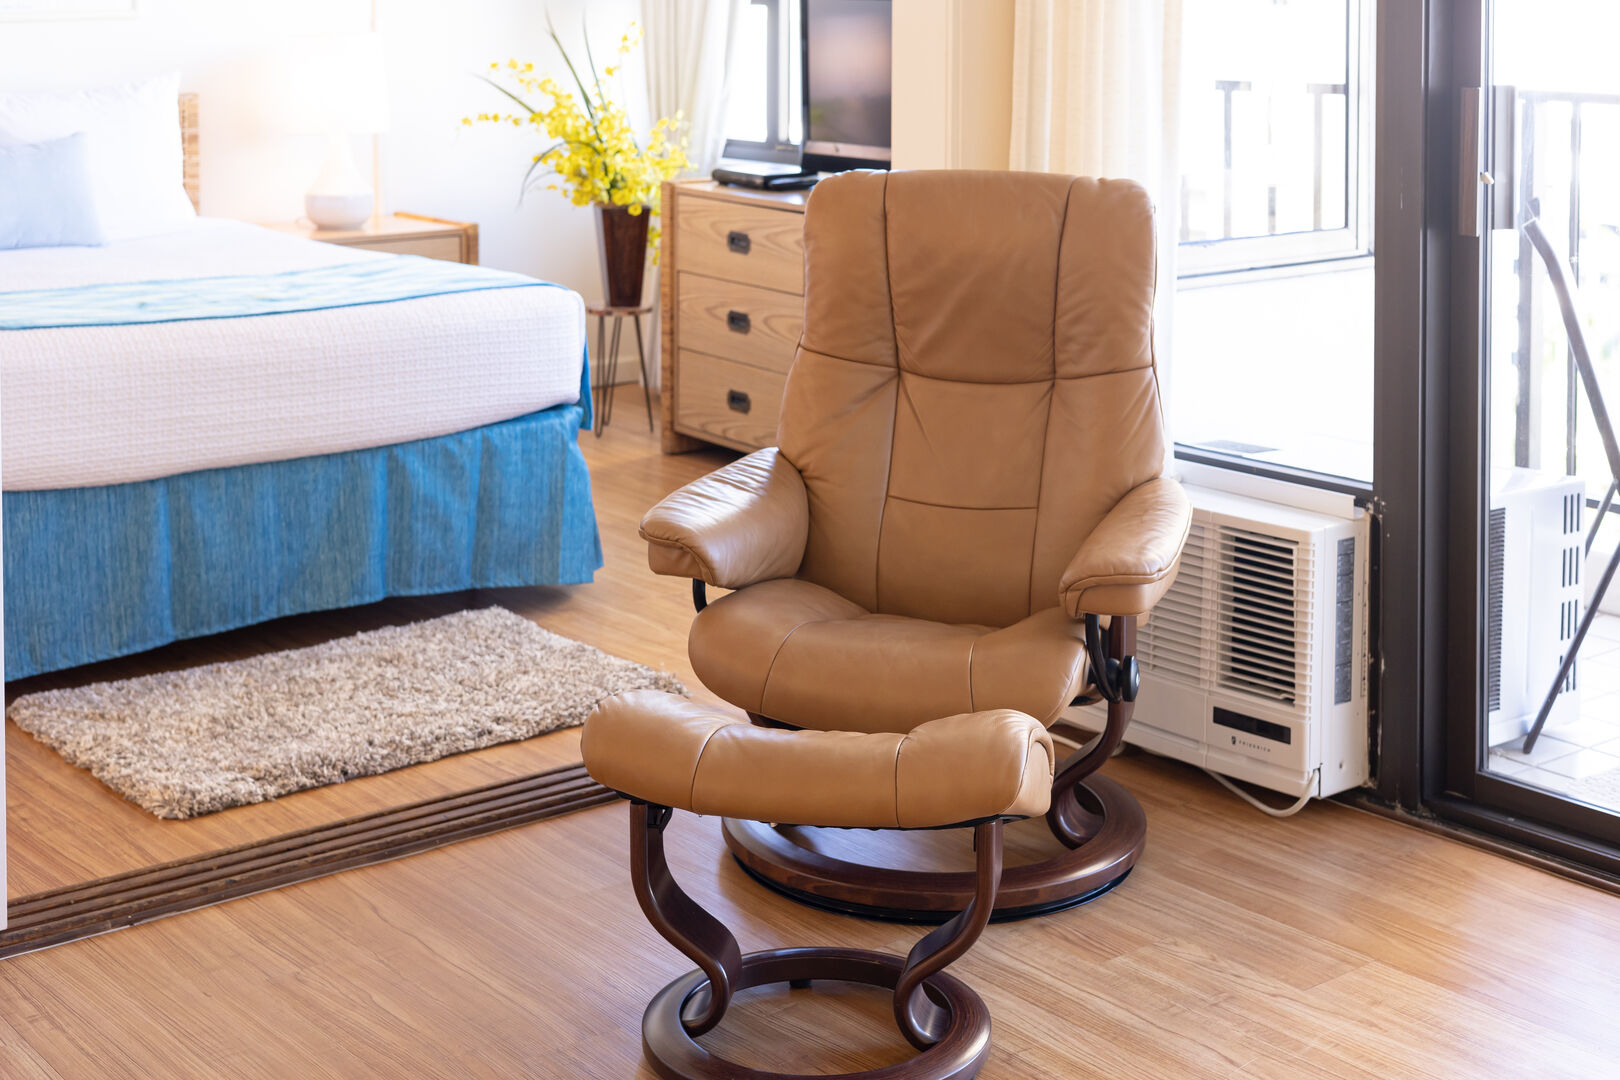 Stressless chair in the living room